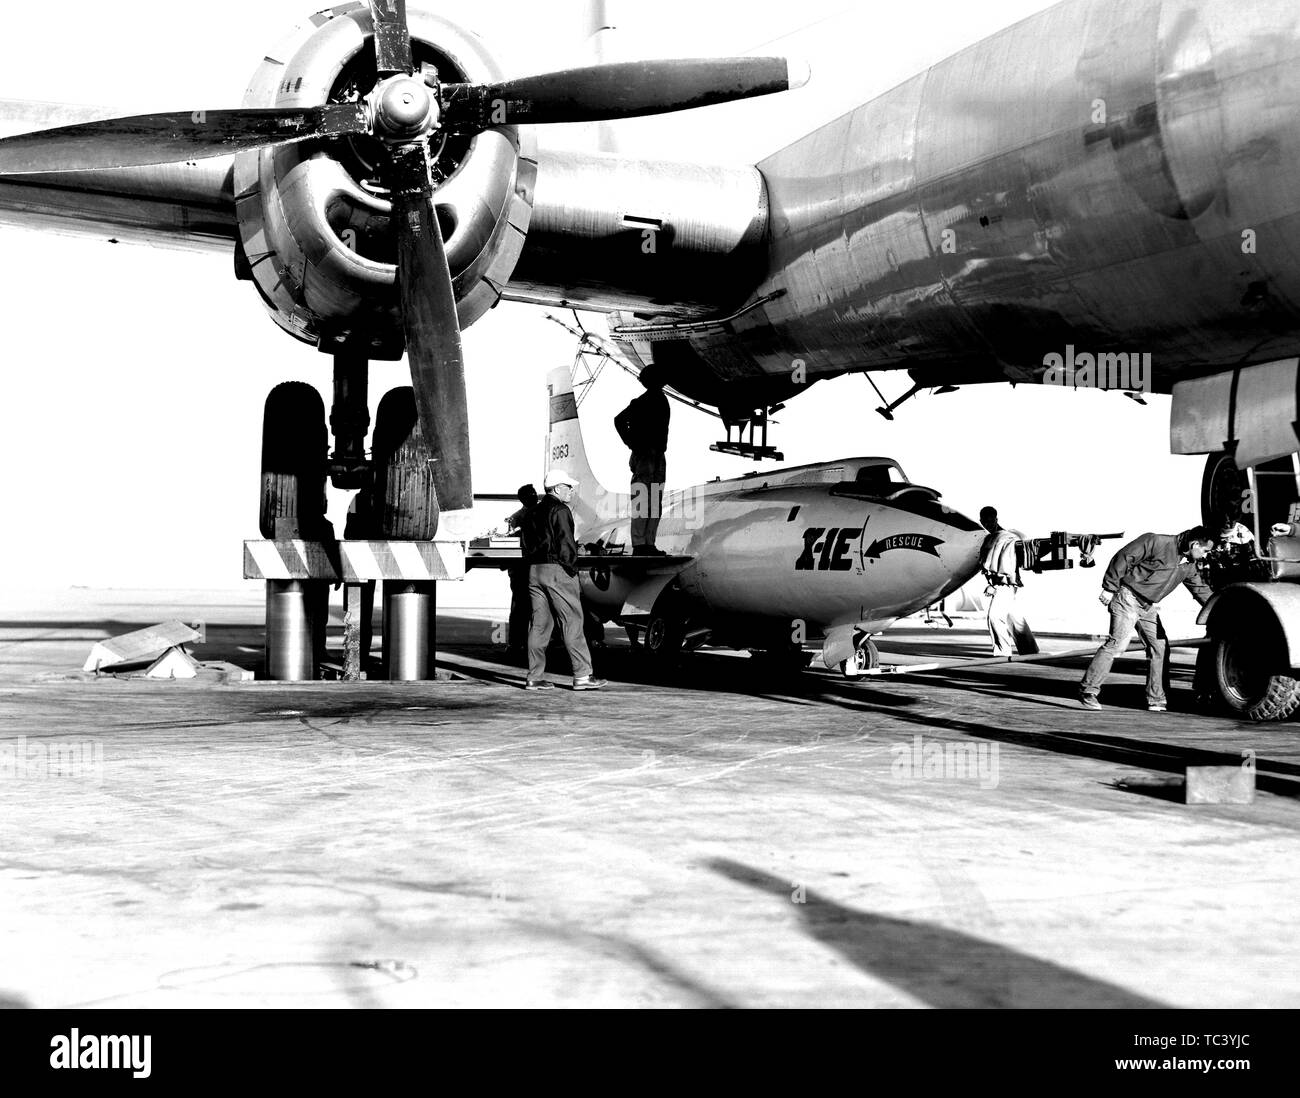 NASA engineers load a Bell Aircraft Corporation X-1E airplane under the Boeing B-29 mothership, 1955. Image courtesy National Aeronautics and Space Administration (NASA). () Stock Photo